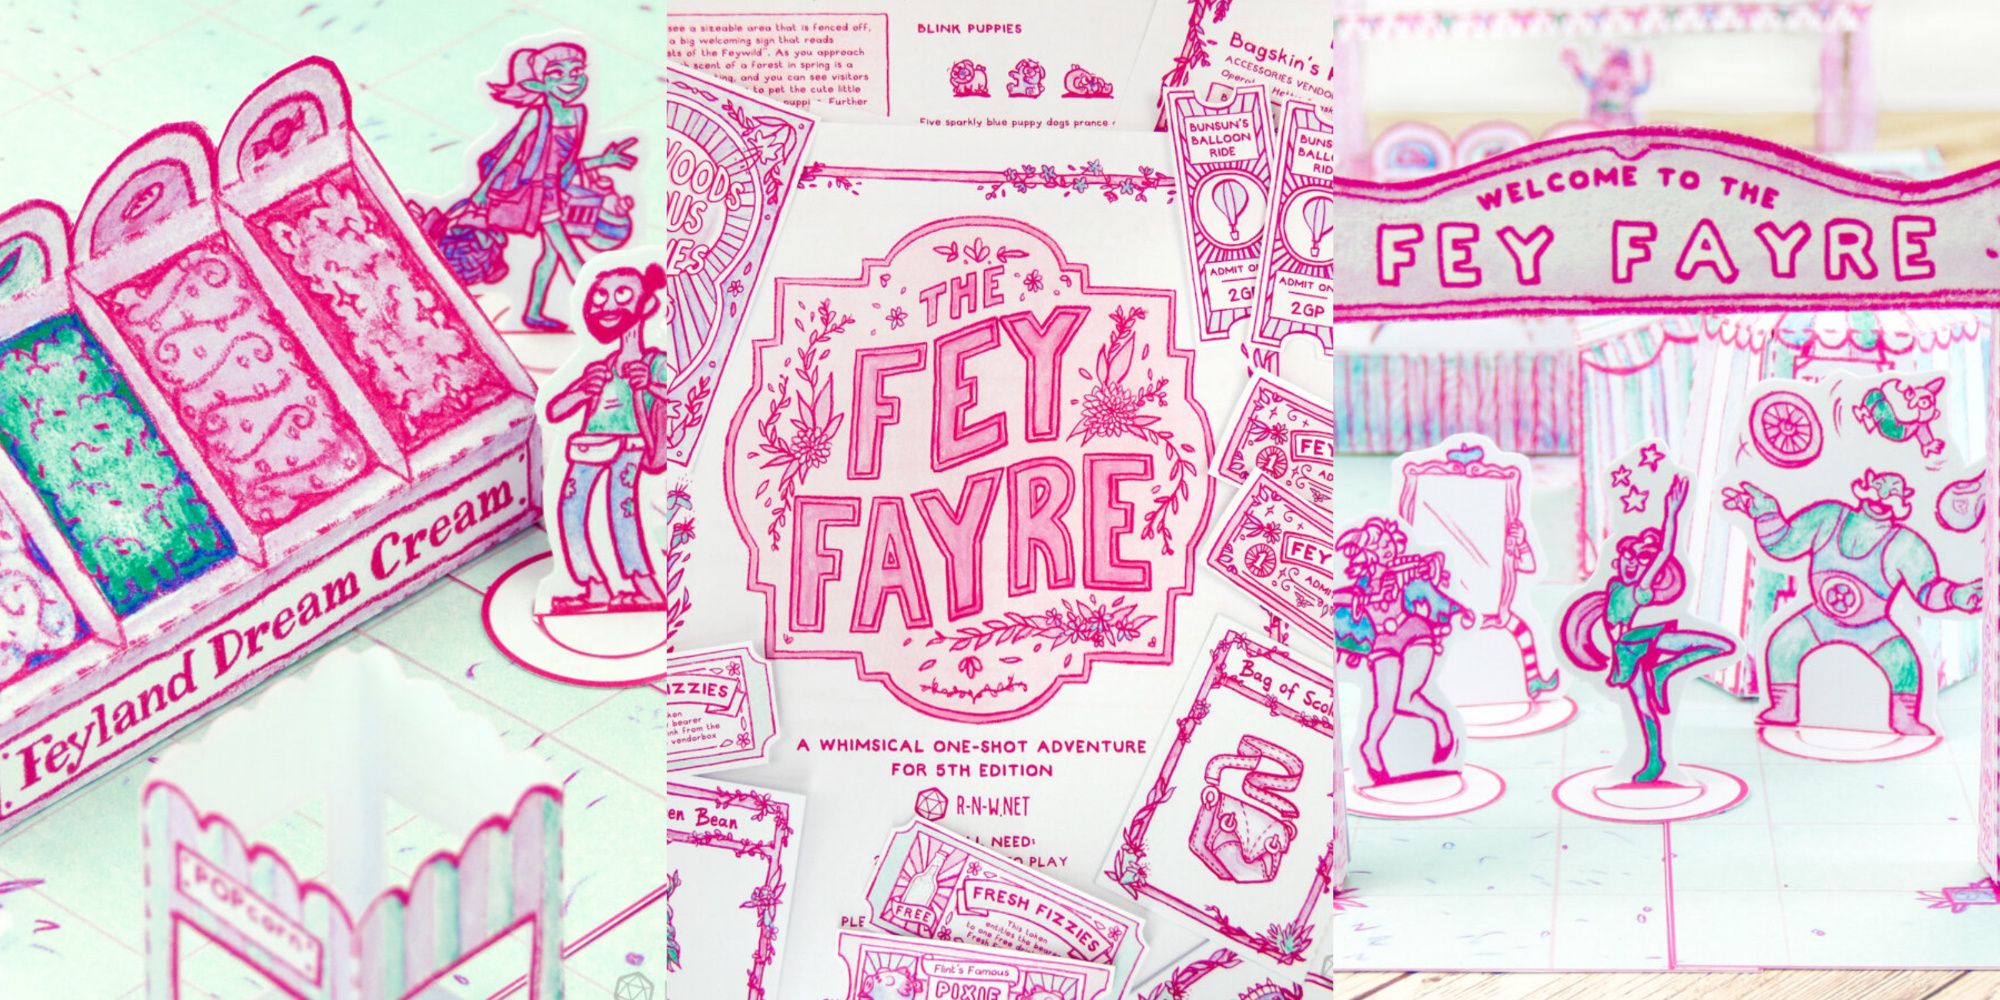 Components of the Fey Fayre, left to right: An ice cream stand, the adventure's cover, the entrance to the faire